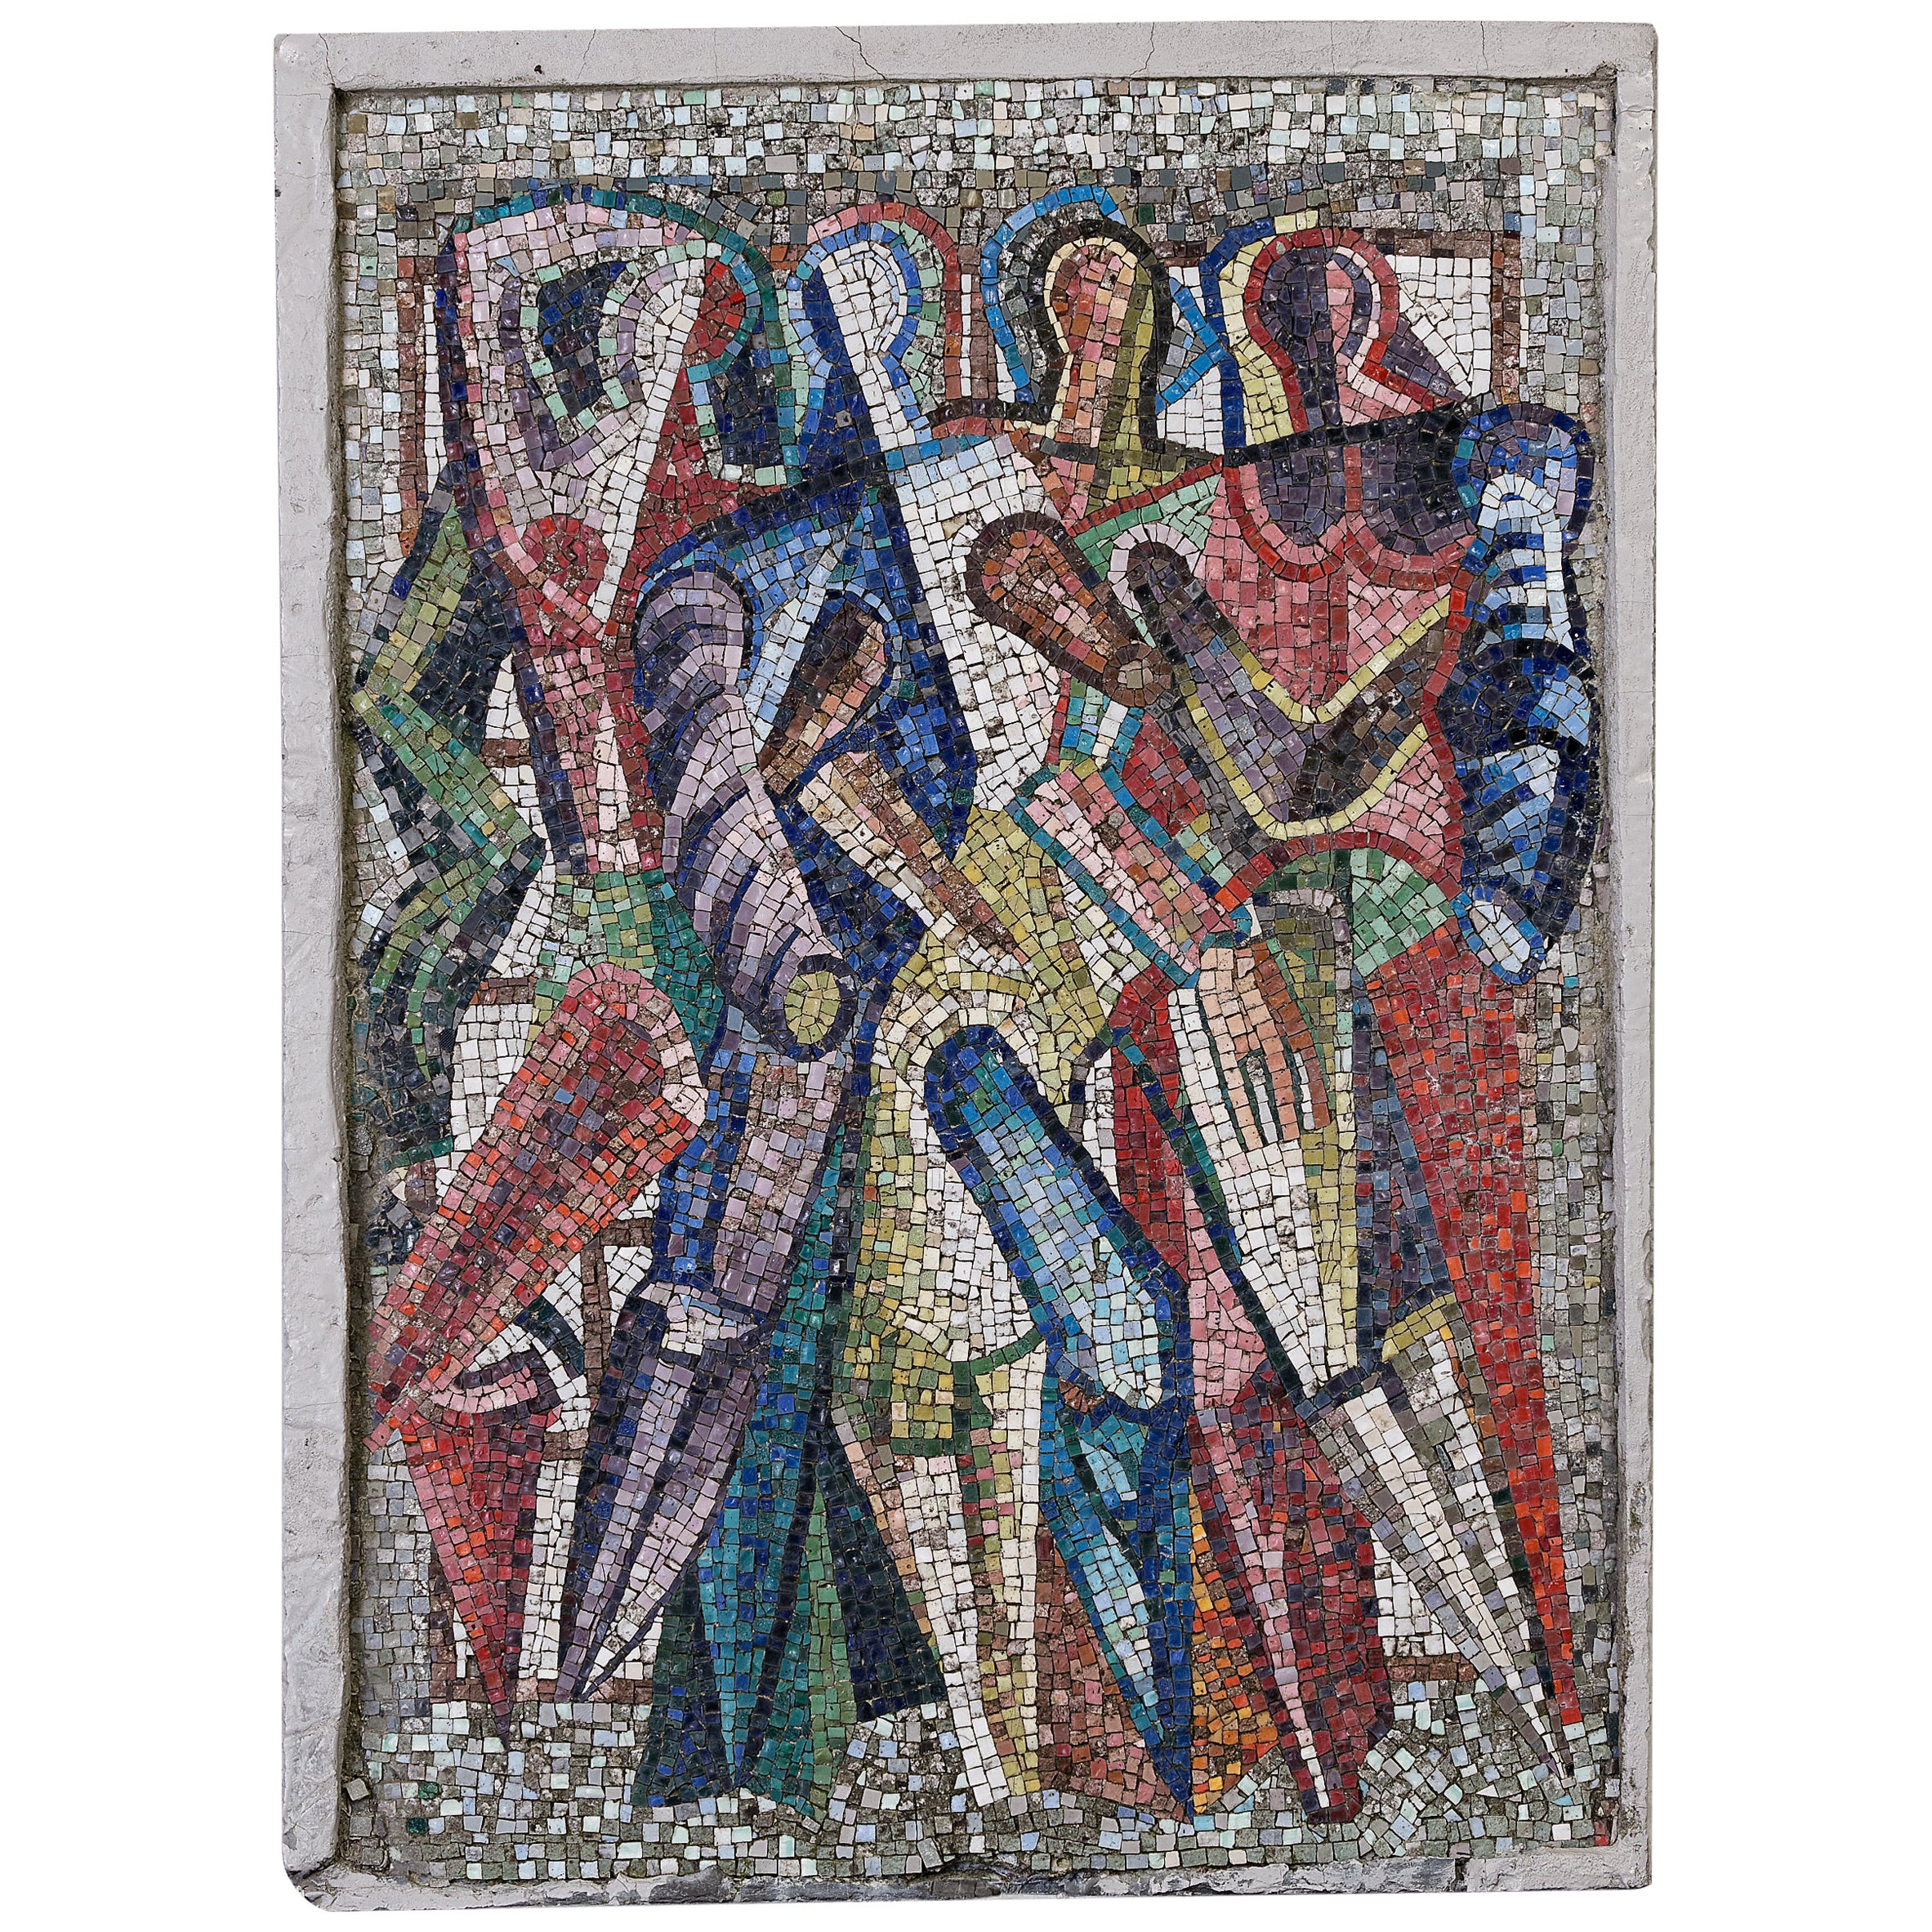 A Large Bright And Colorful Mosaic With Abstract Figures, Petronella & Jacob 